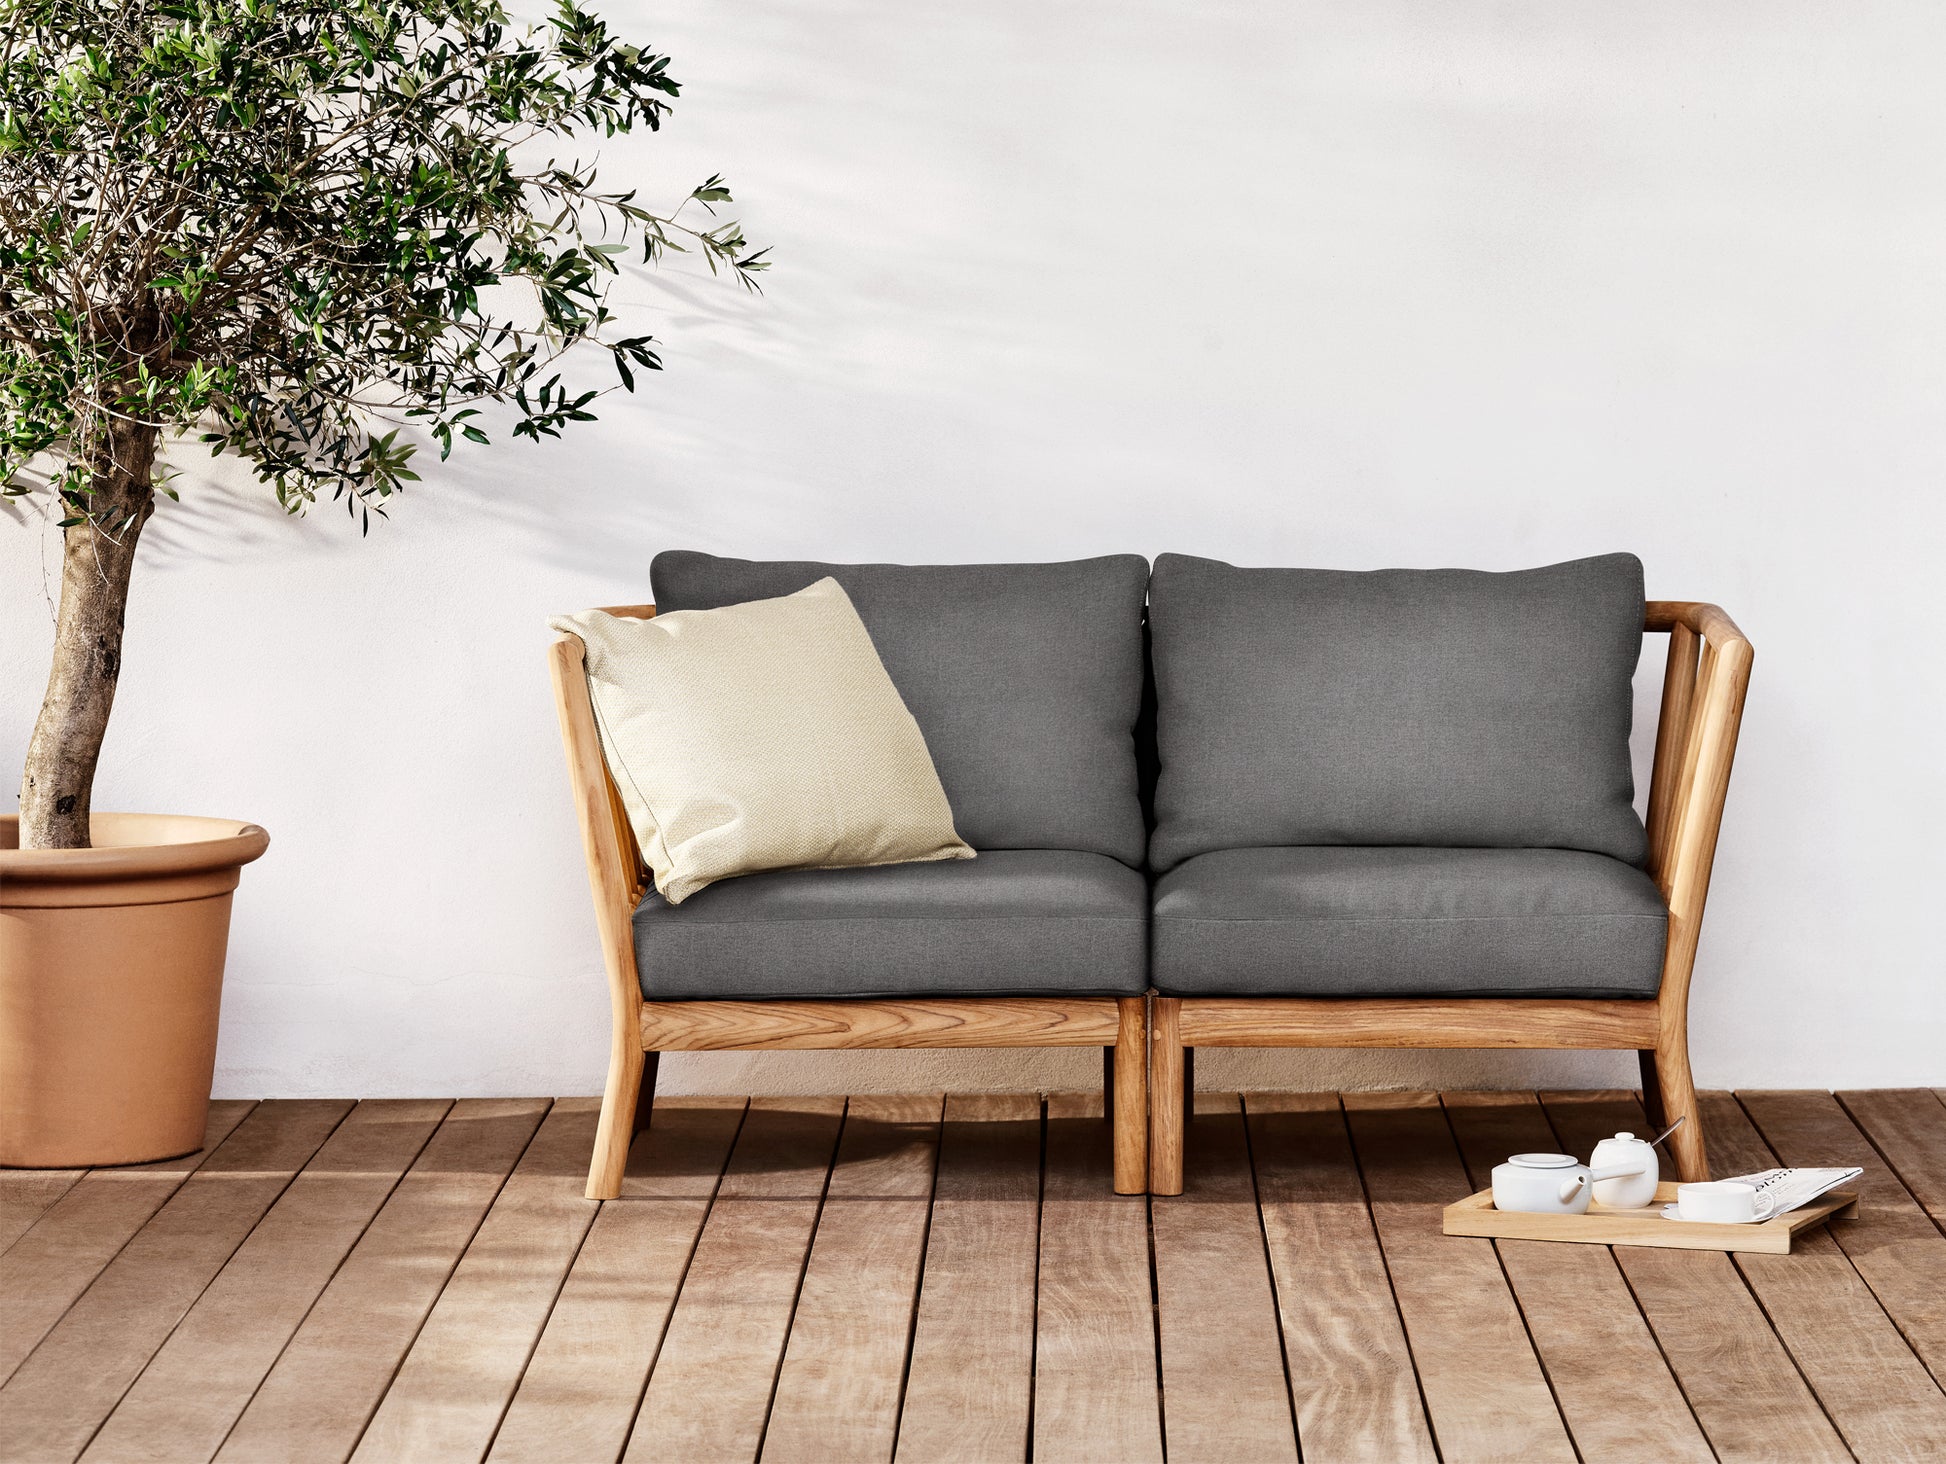 Tradition Outdoor Modular Sofa by Fritz Hansen - Two End Modules join to make a 2-Seater Sofa  